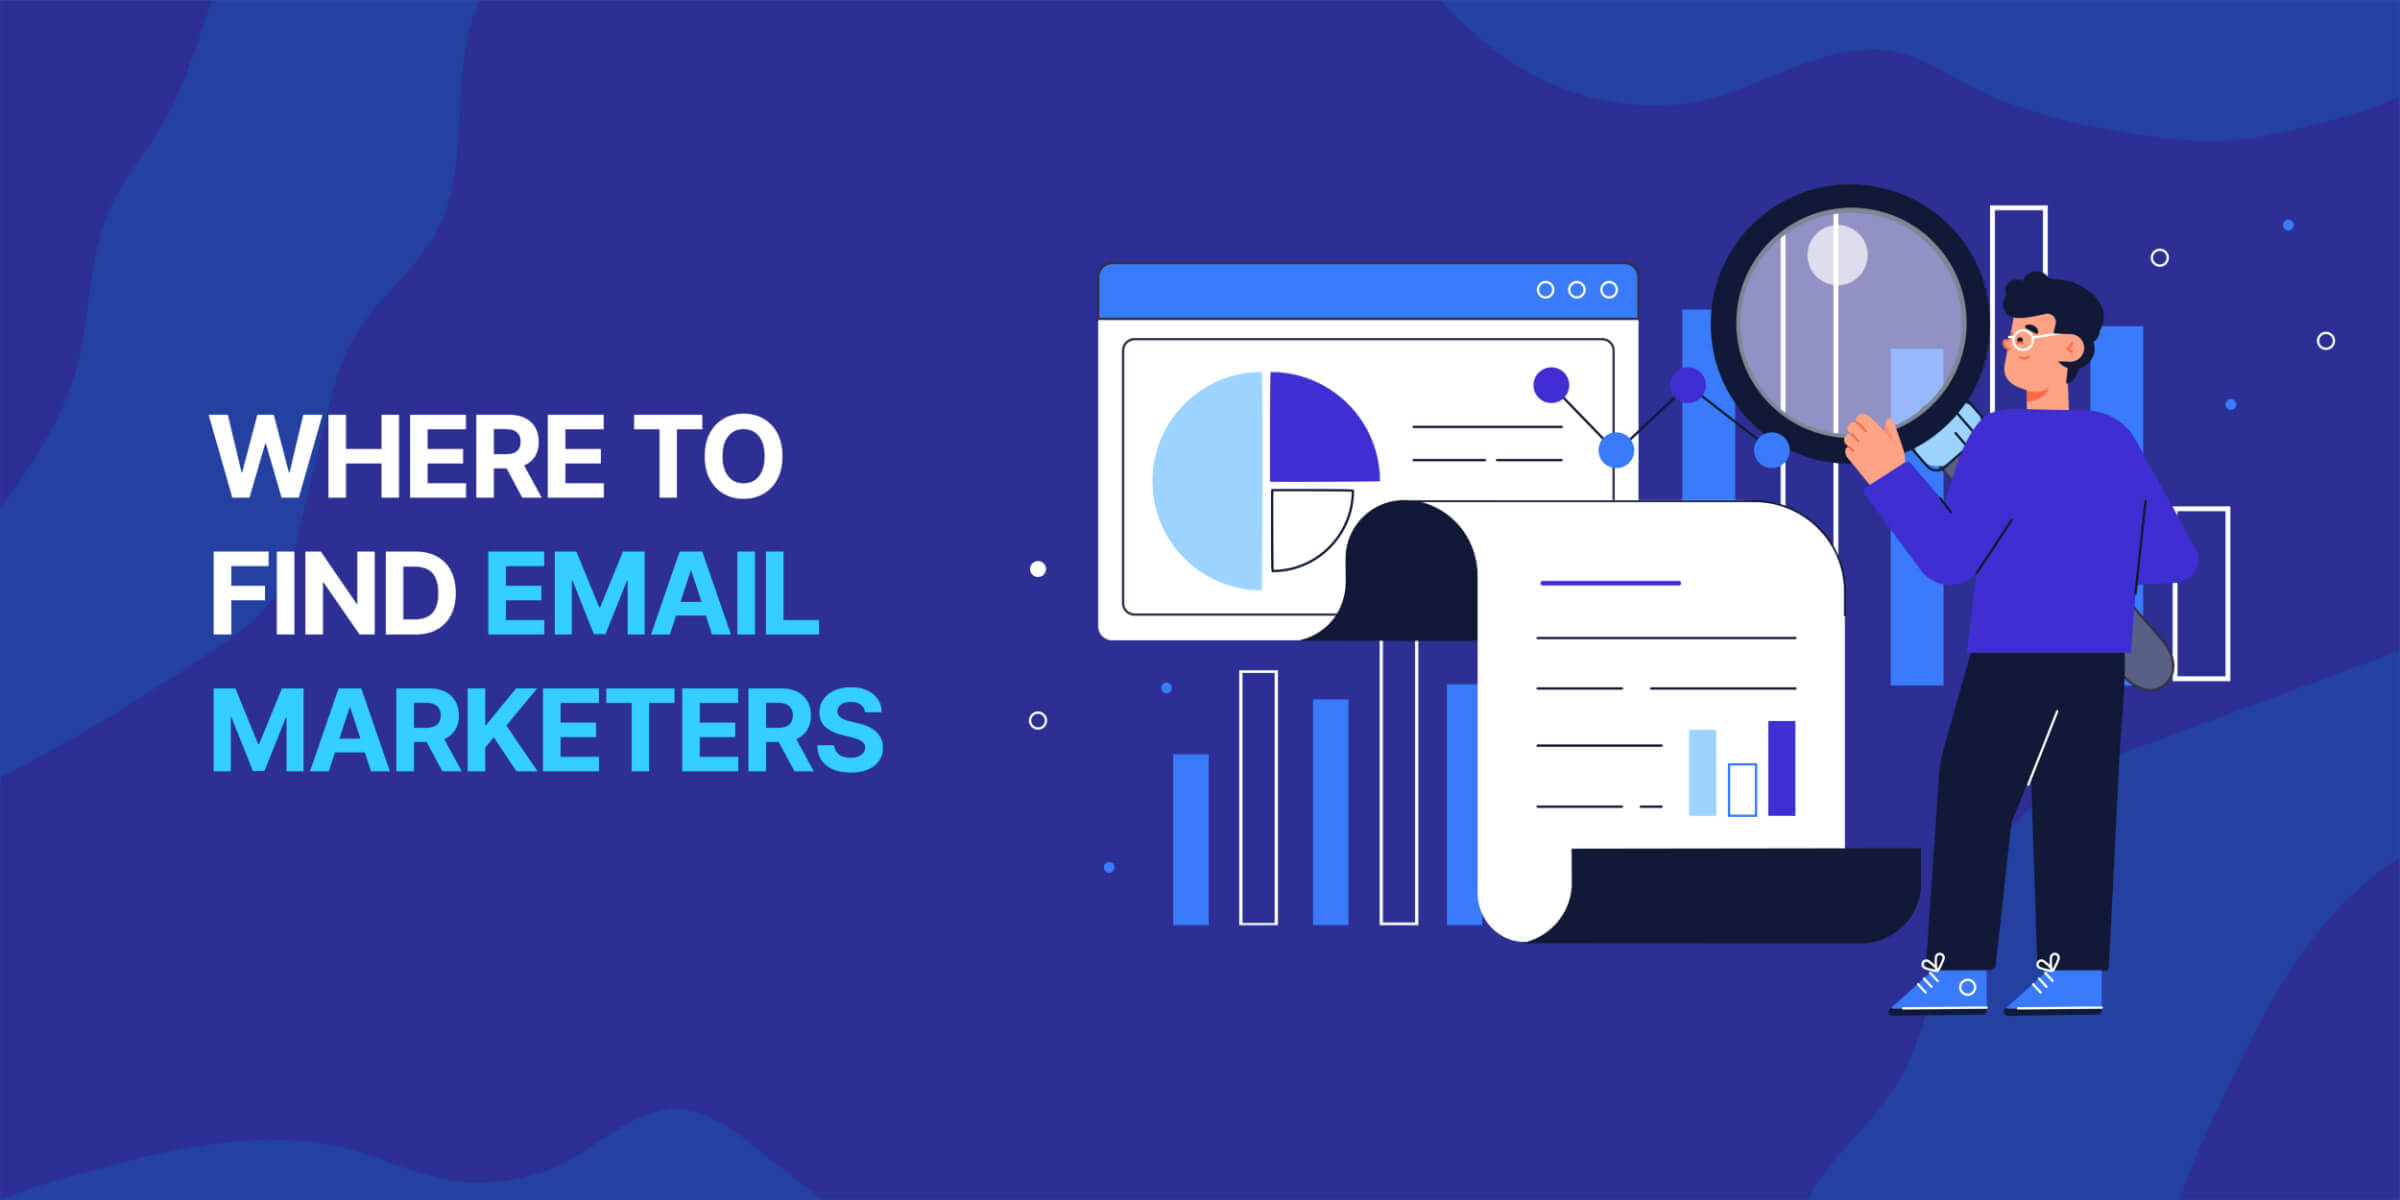 Where to Find Email Marketers